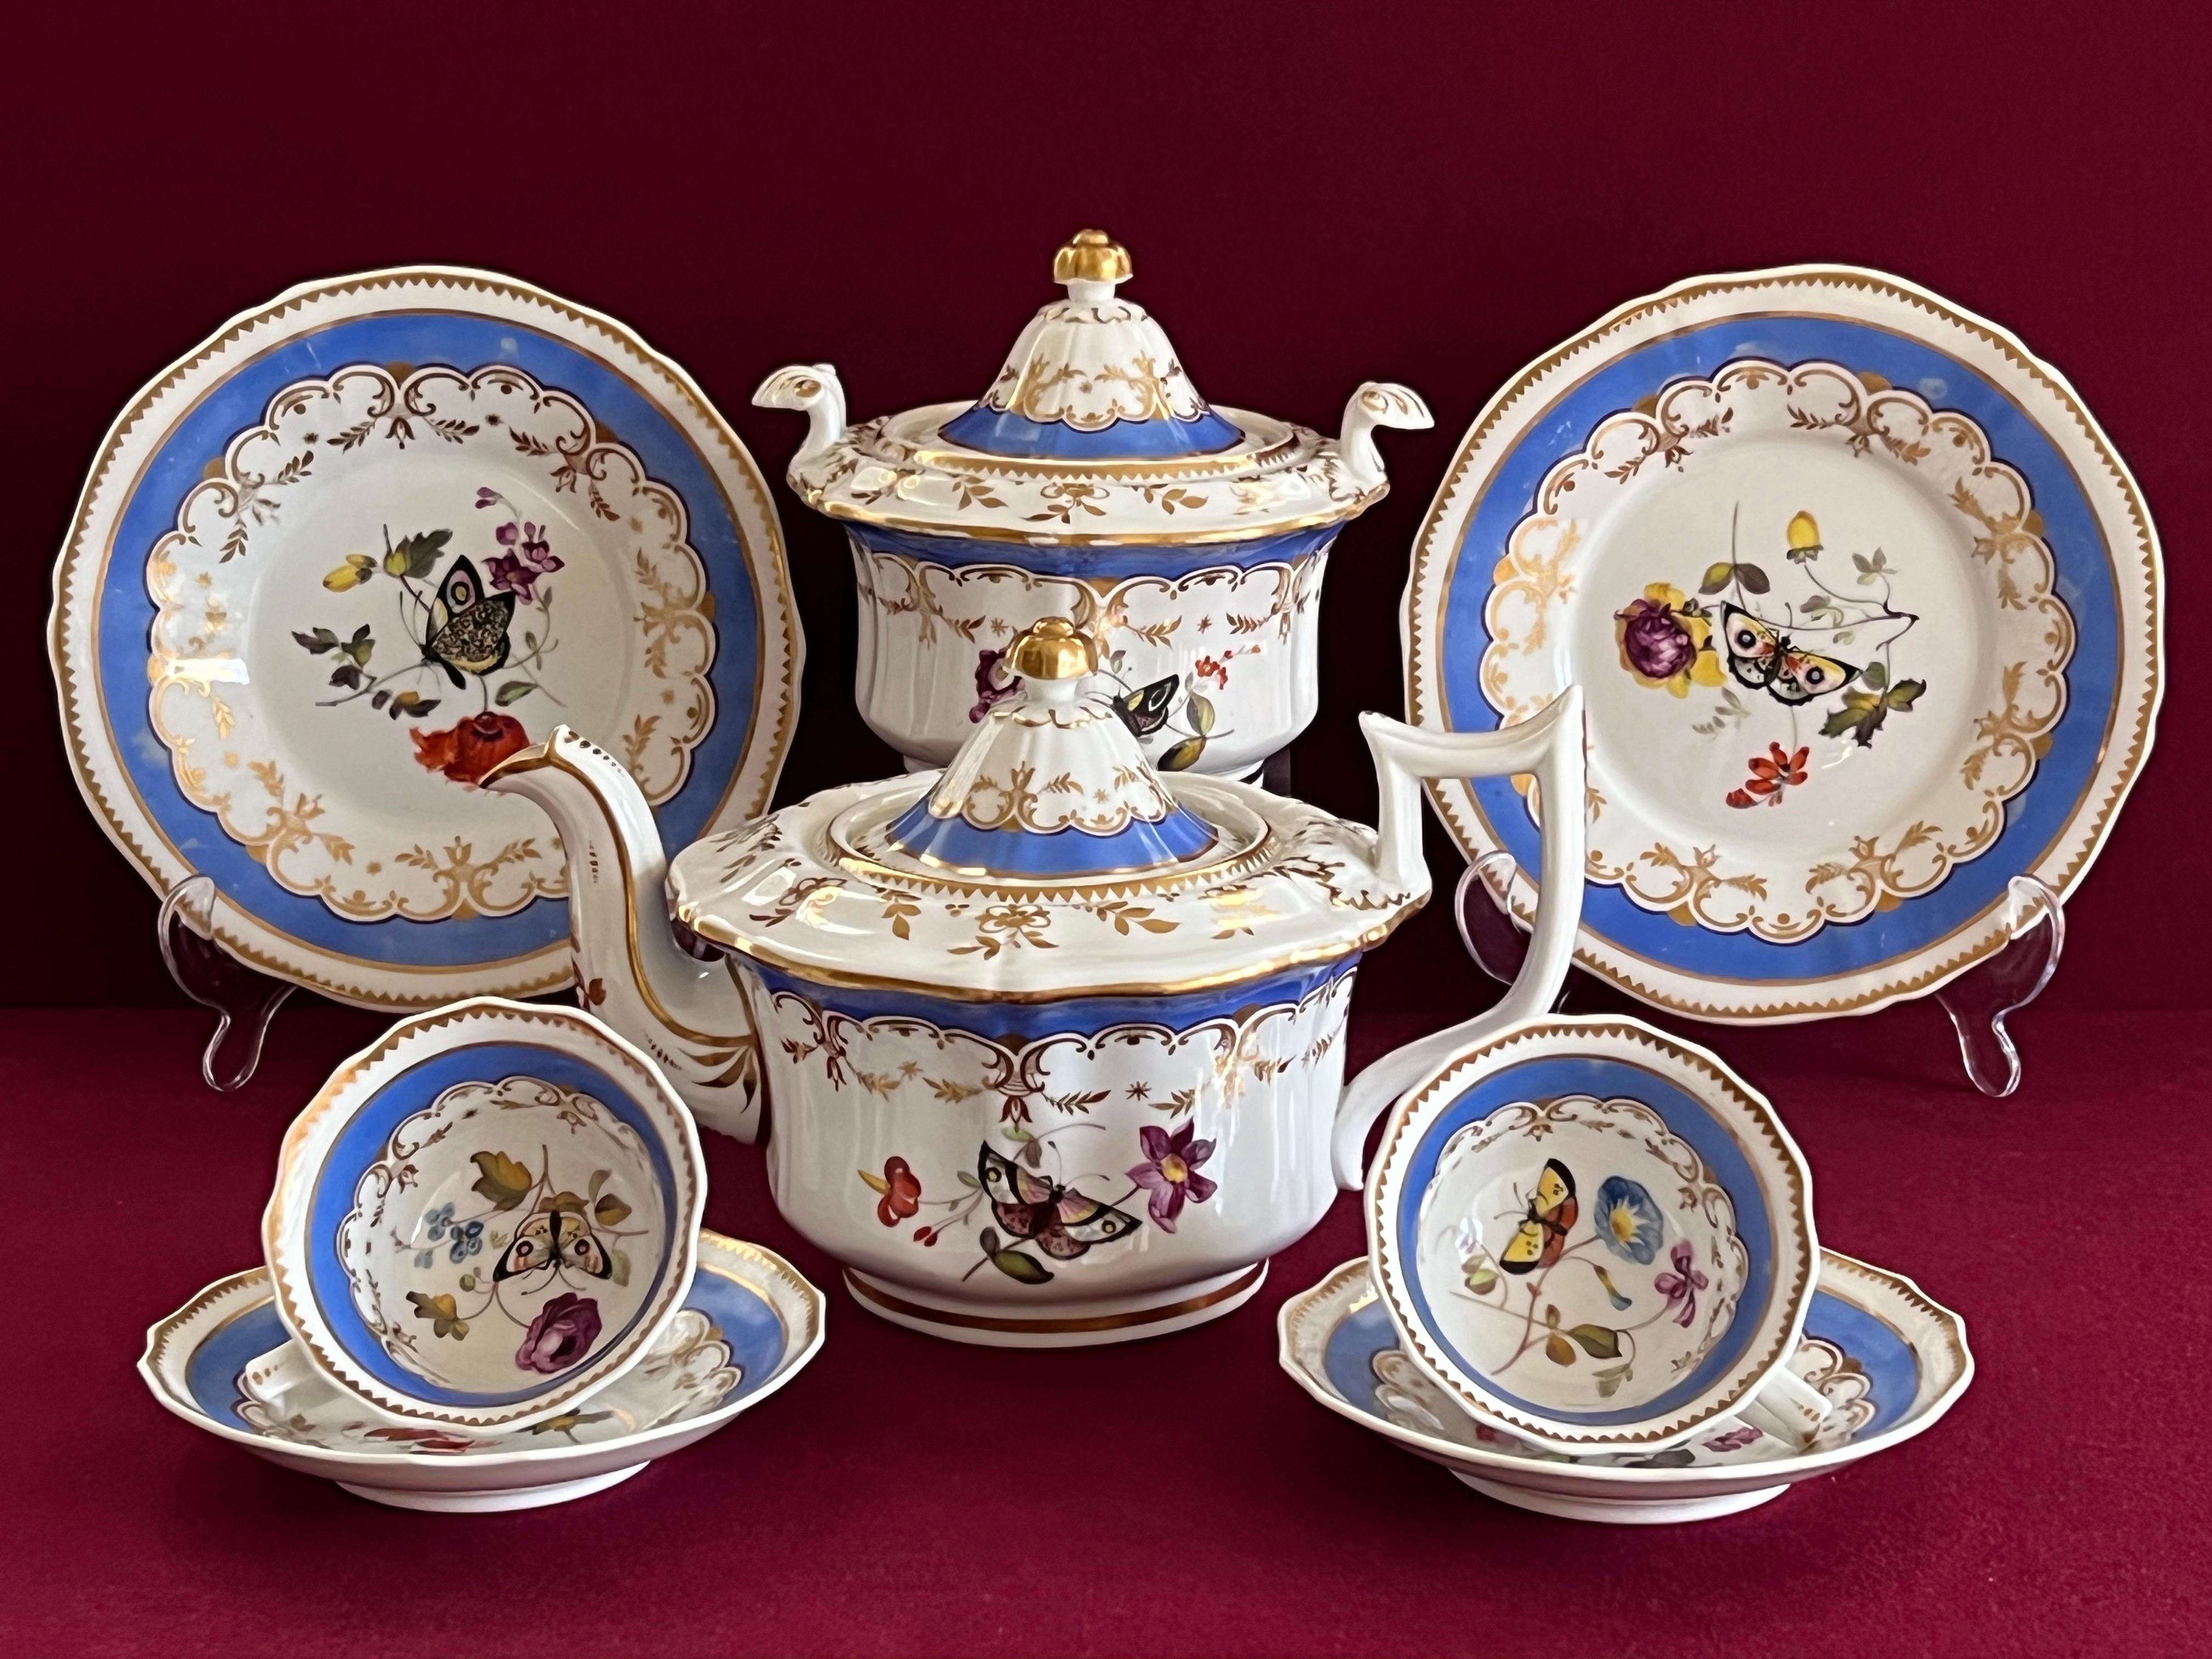 A Machin Porcelain Part Tea Set in pattern 955 circa 1835. Finely decorated with a matte blue border, each piece being decorated with a finely painted Butterfly.

Consisting of a teapot, a sugar box, 2 tea cups and saucers and 2 plates.